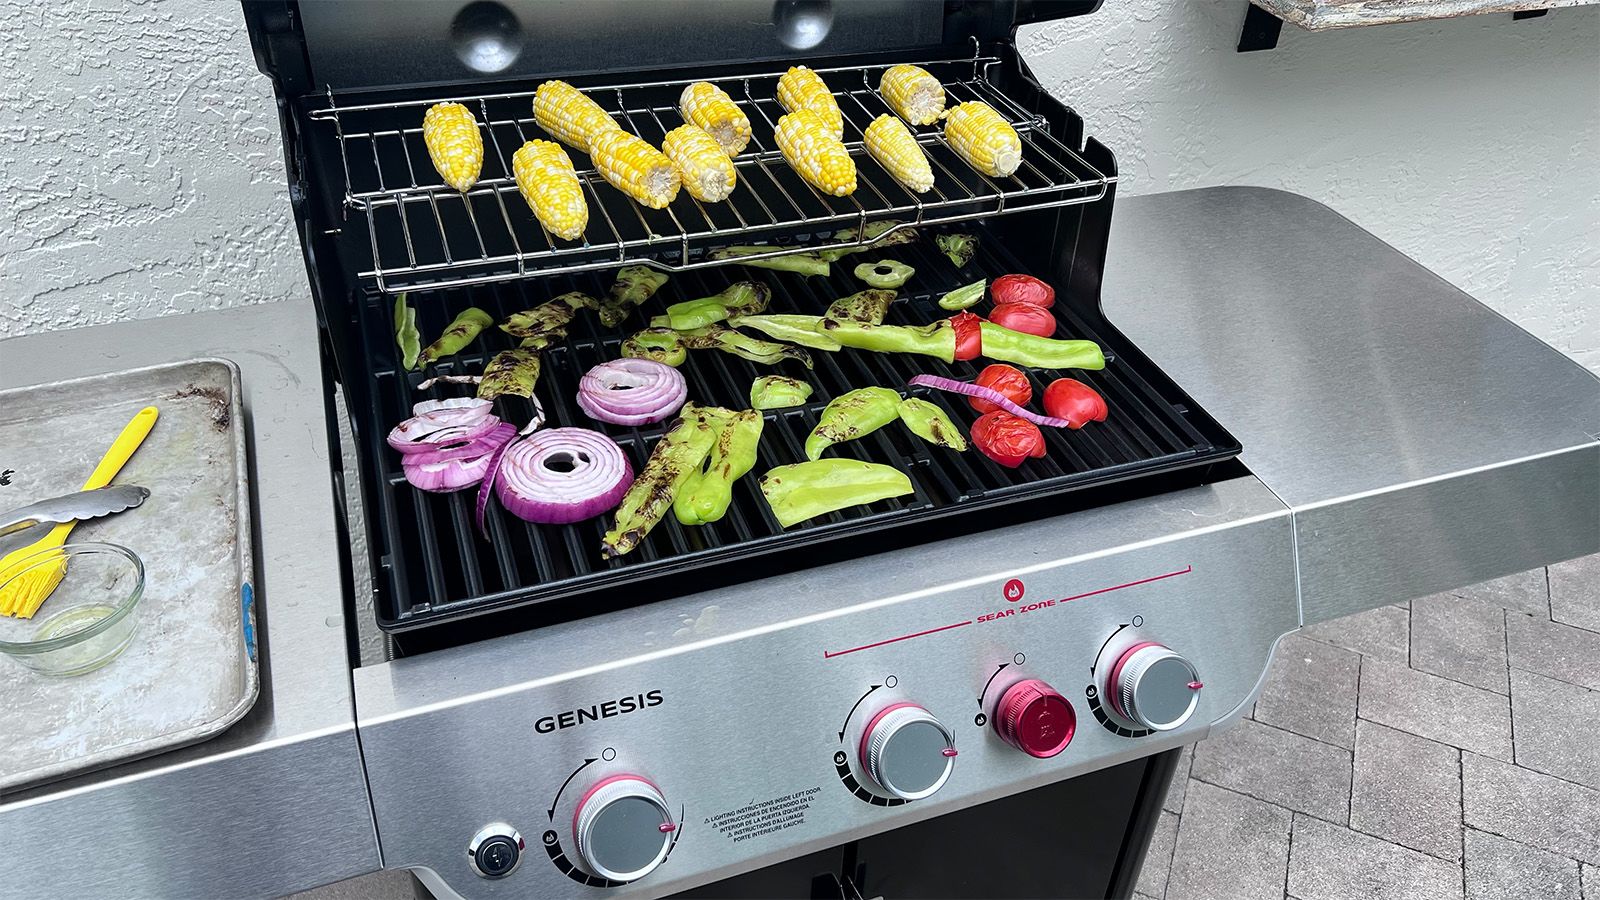 These Smart-Gas-Grill Features Will Make BBQ-Ing A No-Brainer